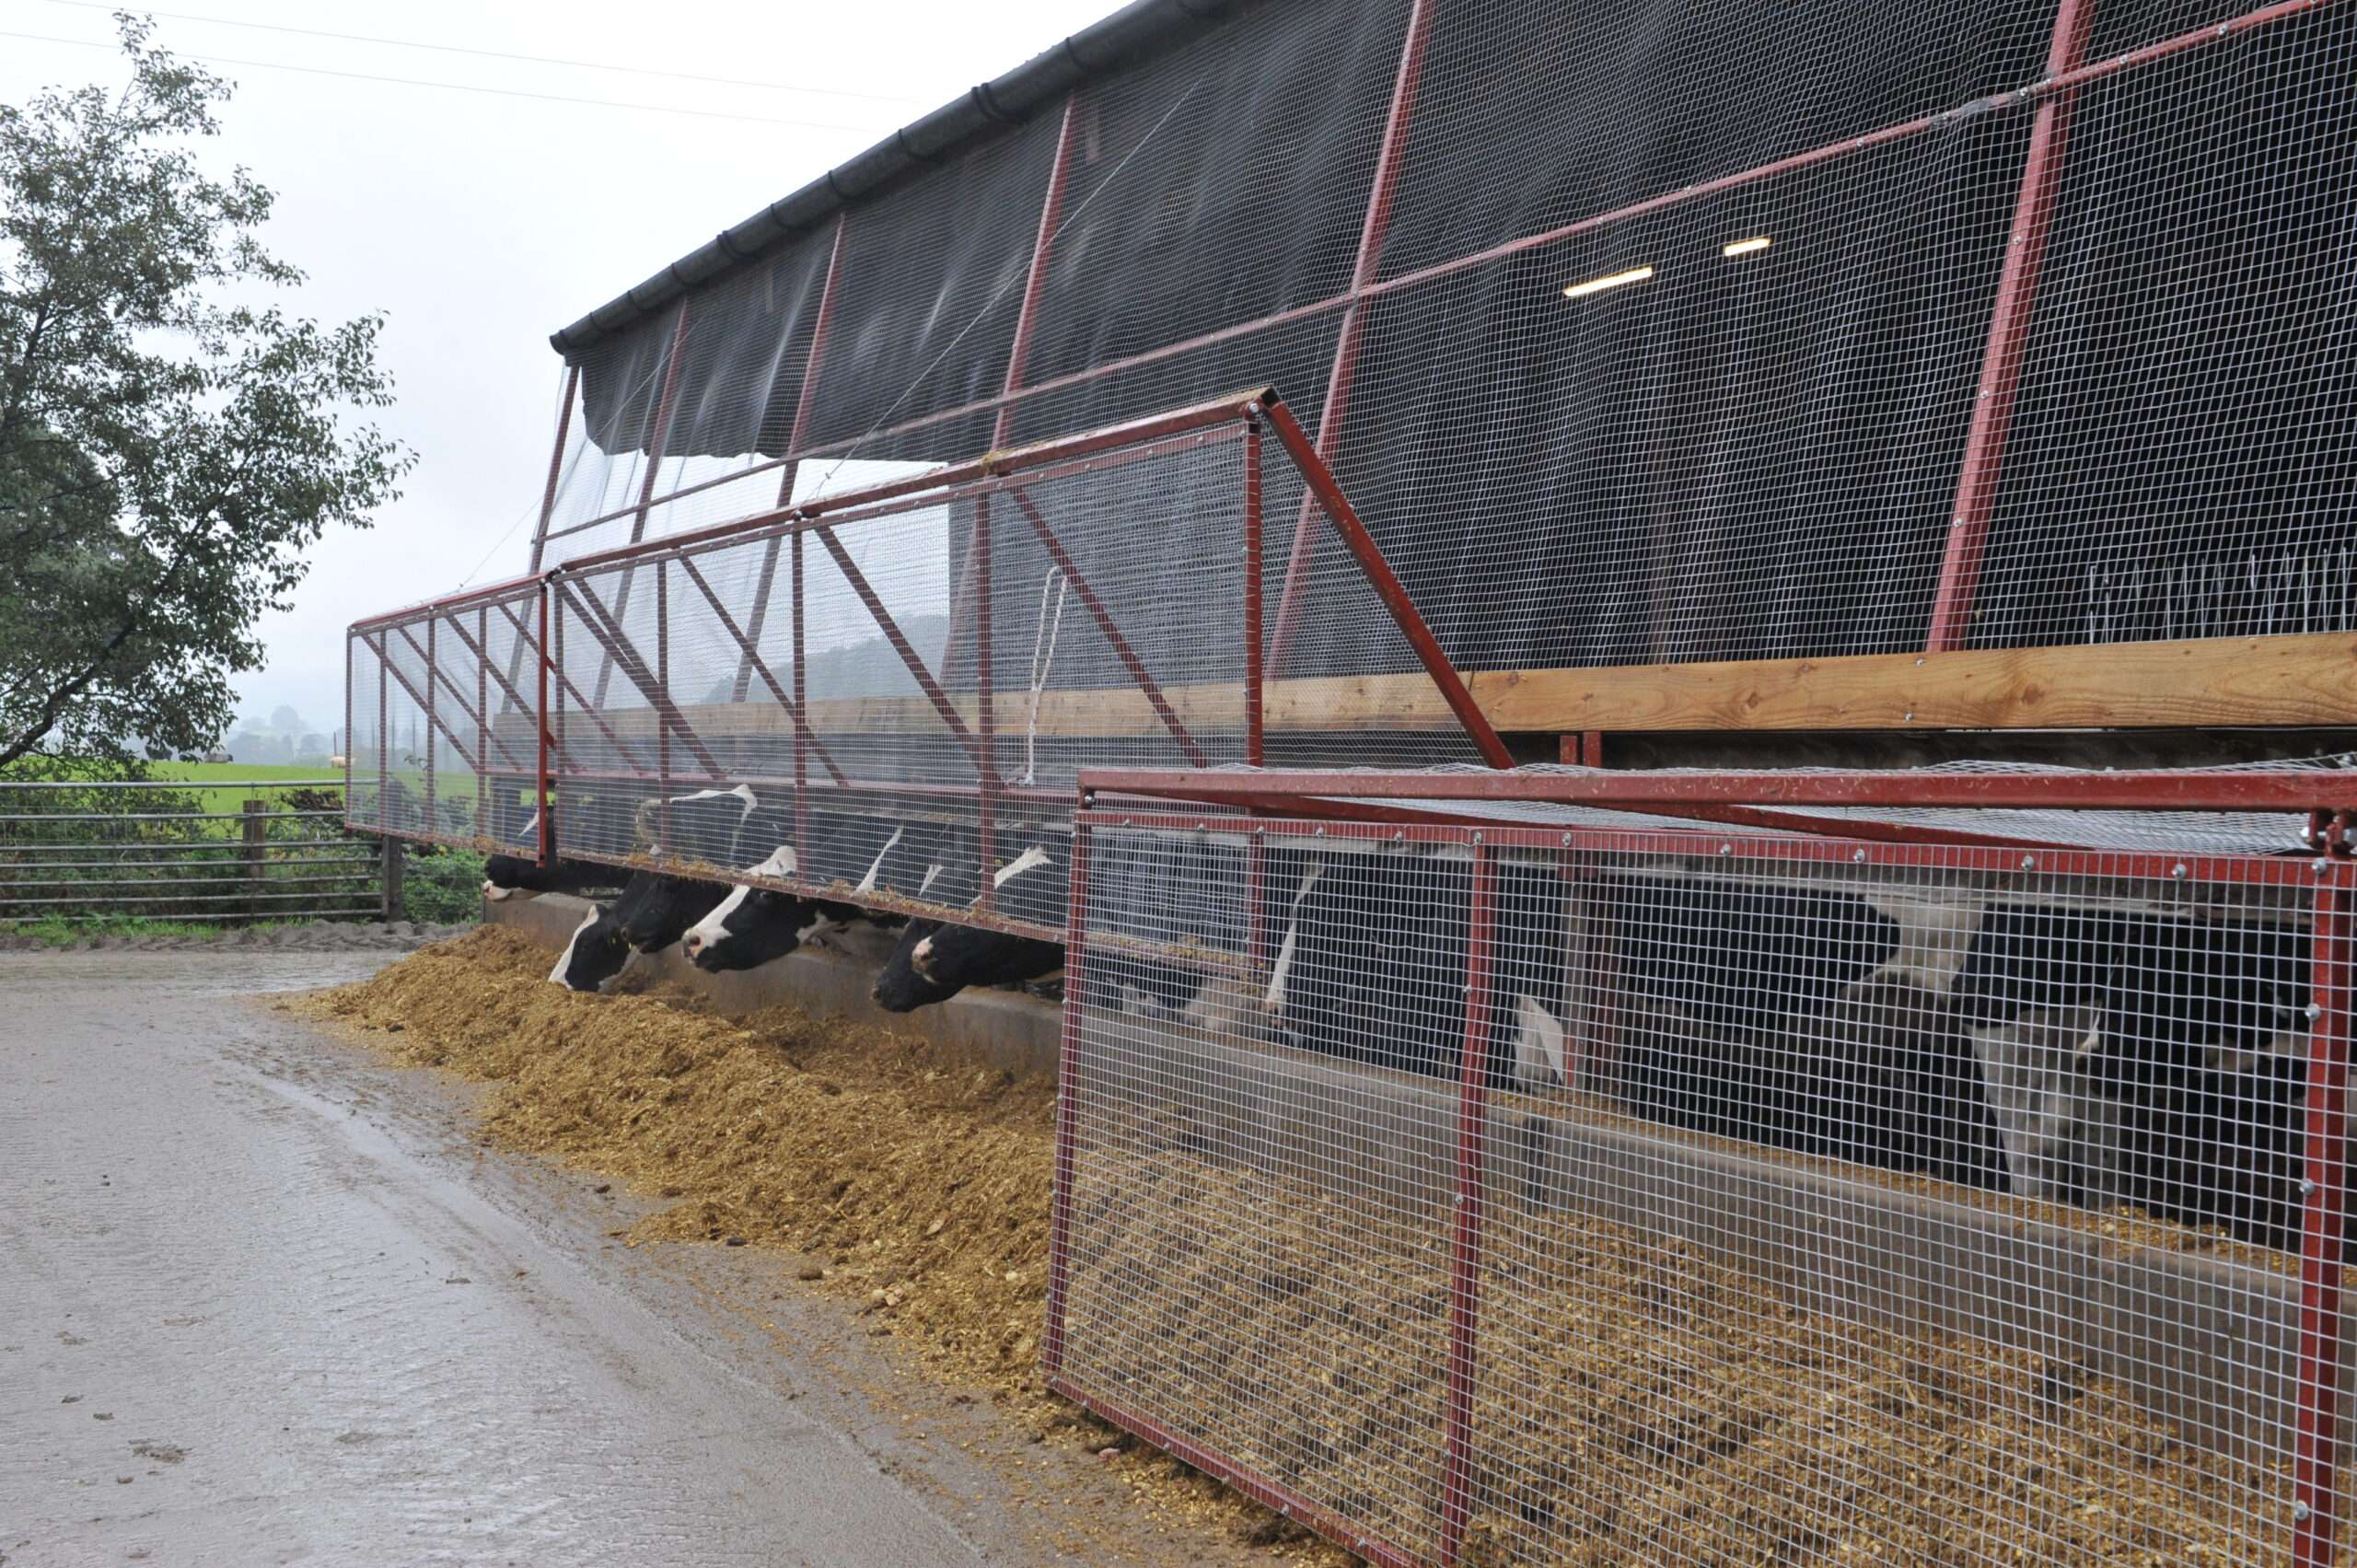 Investing in starling-proof cattle housing could save dairy farmers two months in cattle feed